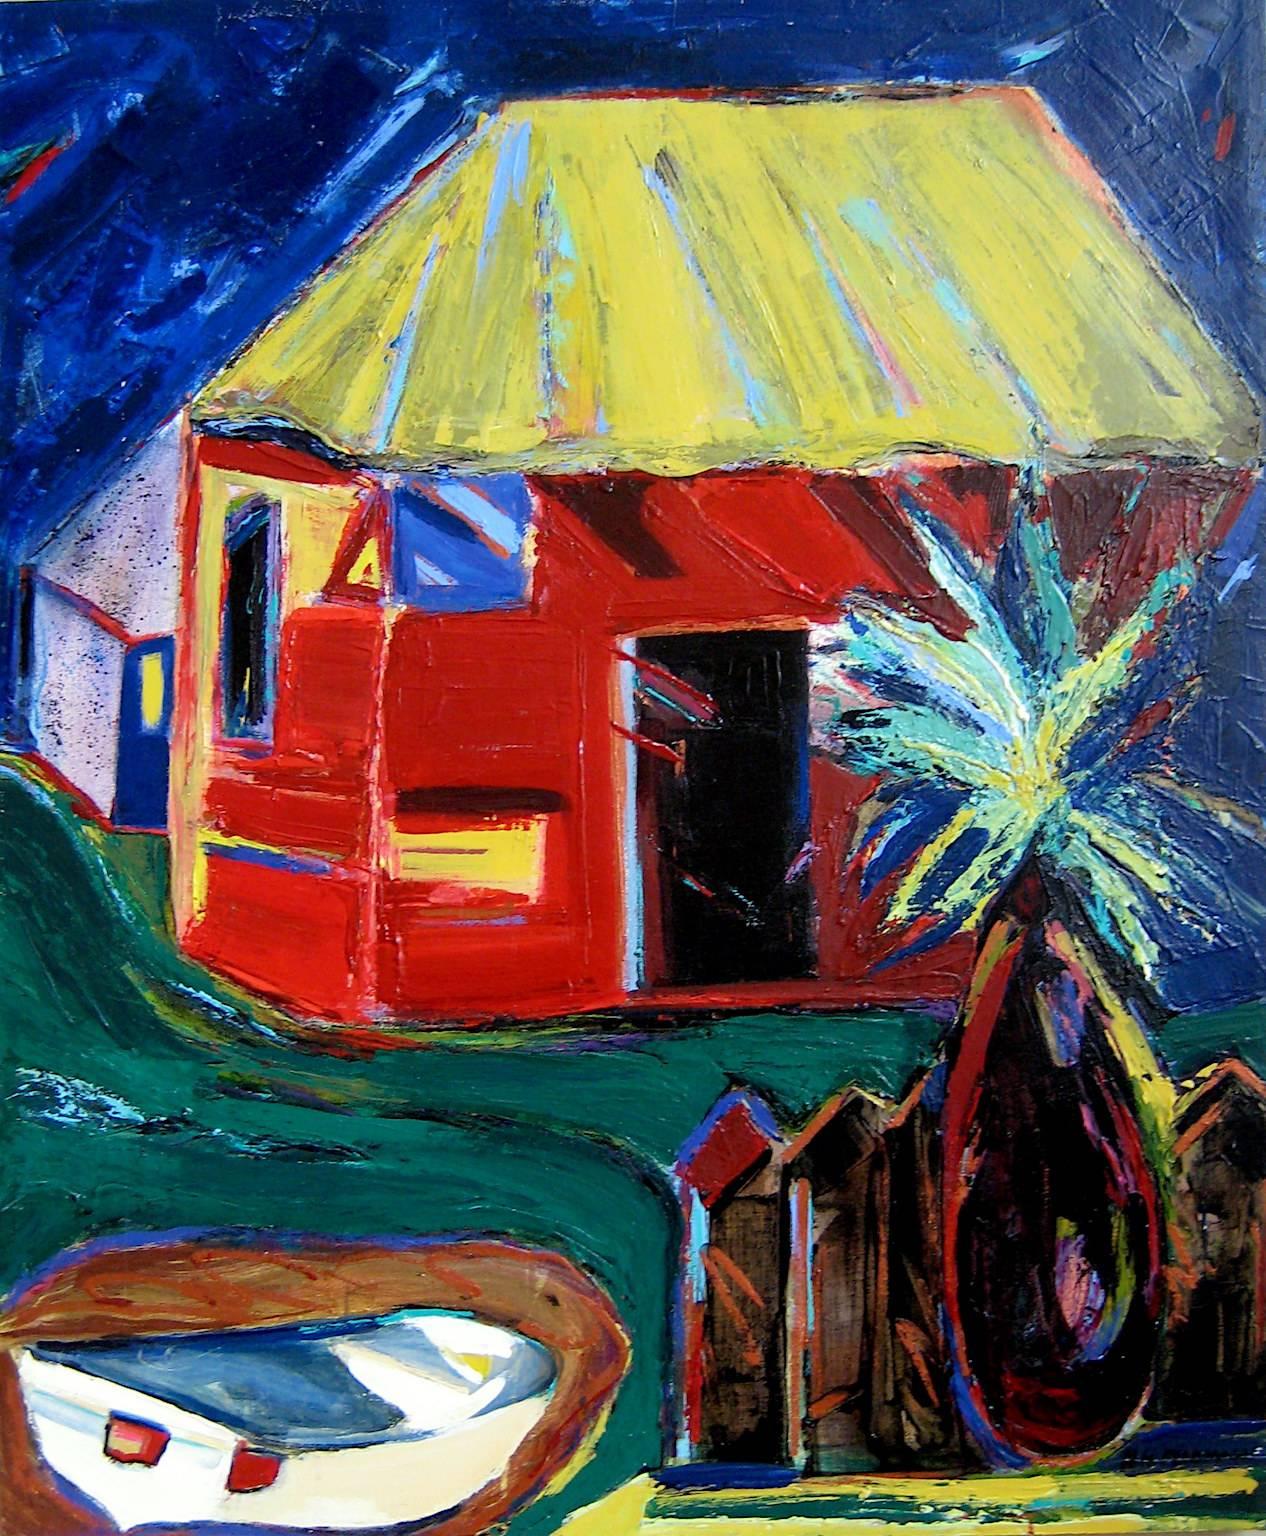 Nan Hass Feldman Landscape Painting - "The Red House", landscape, tree, boat, sky, yellow, blue, acrylic painting